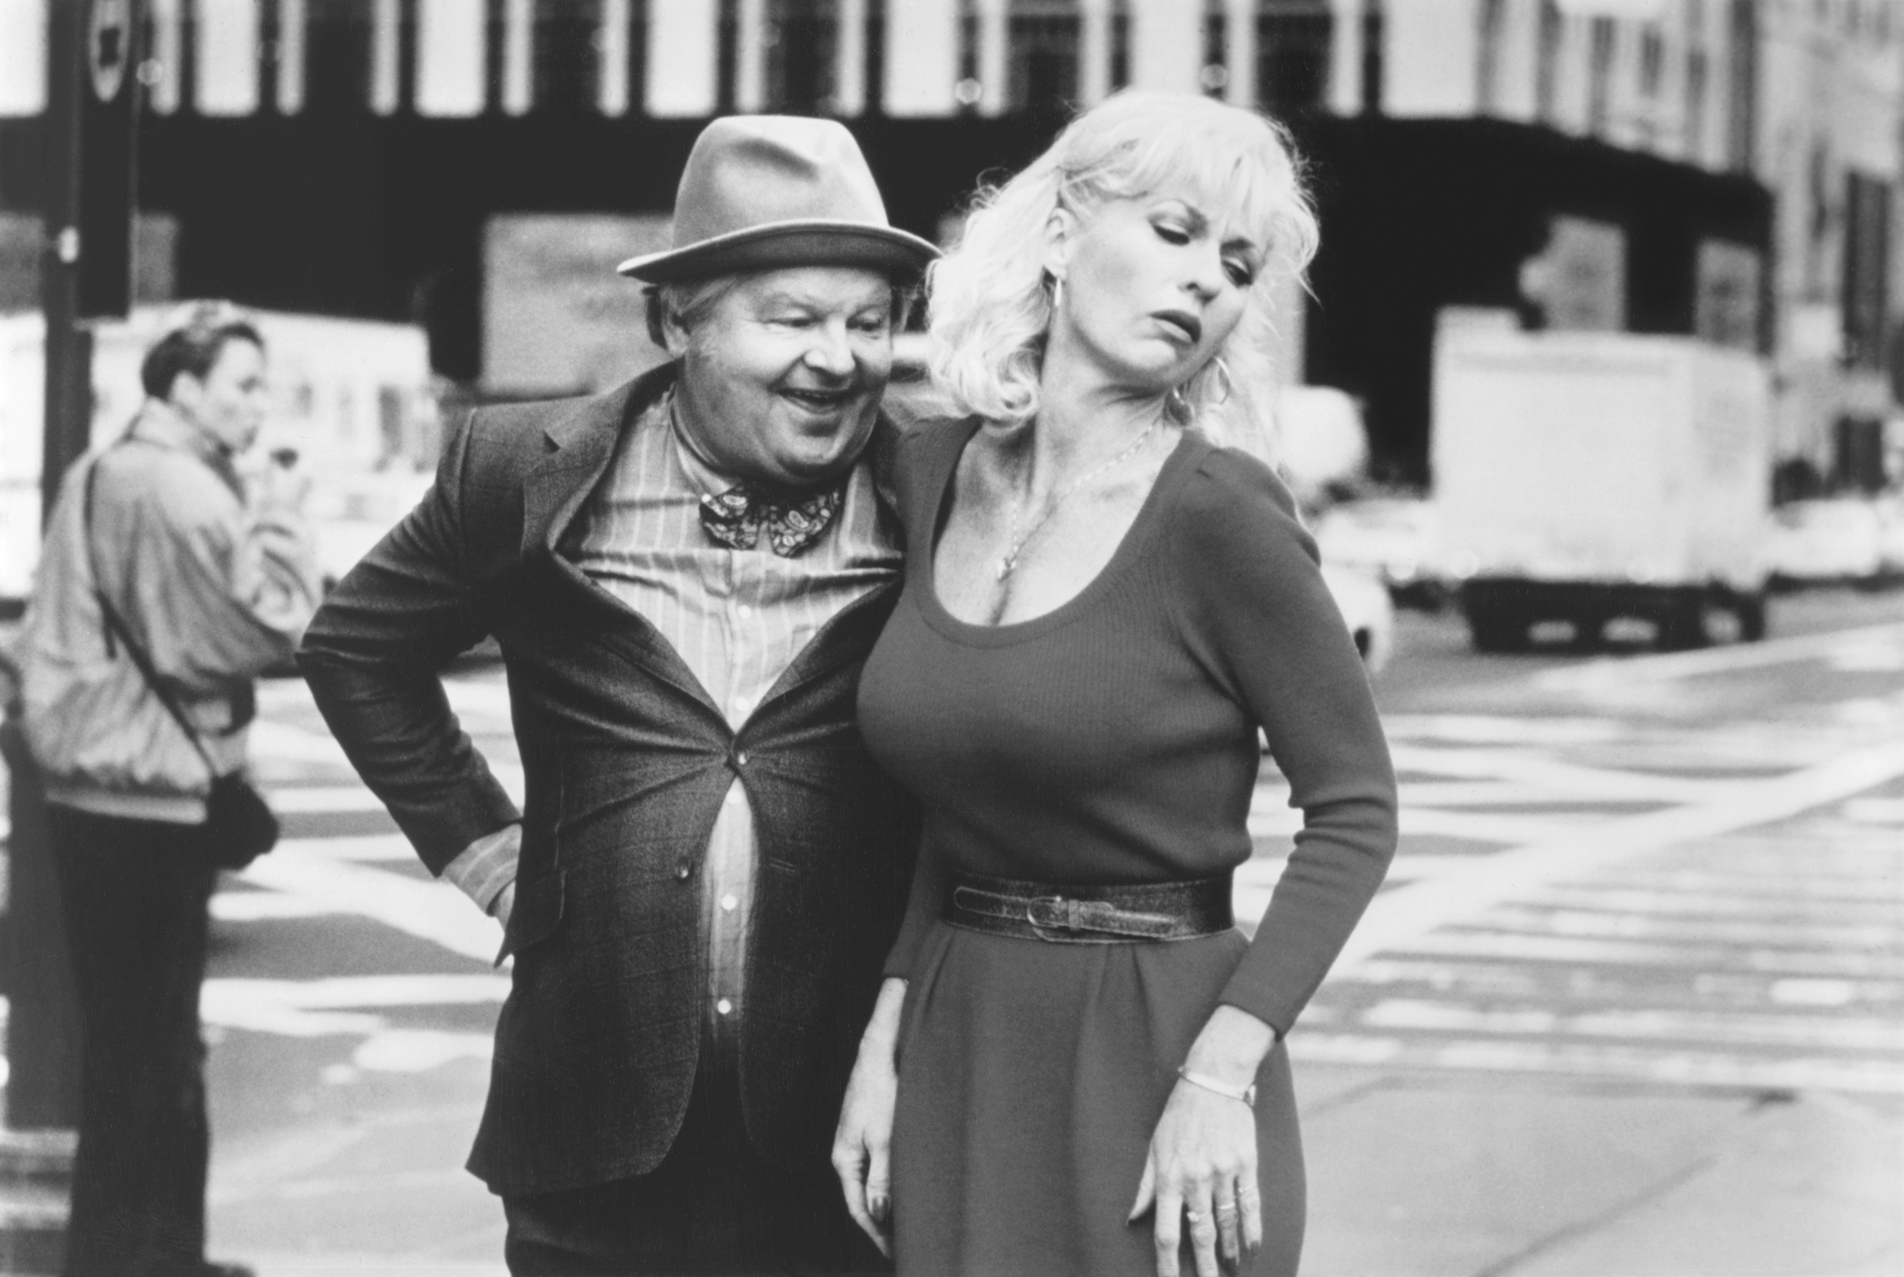 People 1904x1277 men women actor Benny Hill Comedian monochrome smiling vintage photography street building blonde long hair England